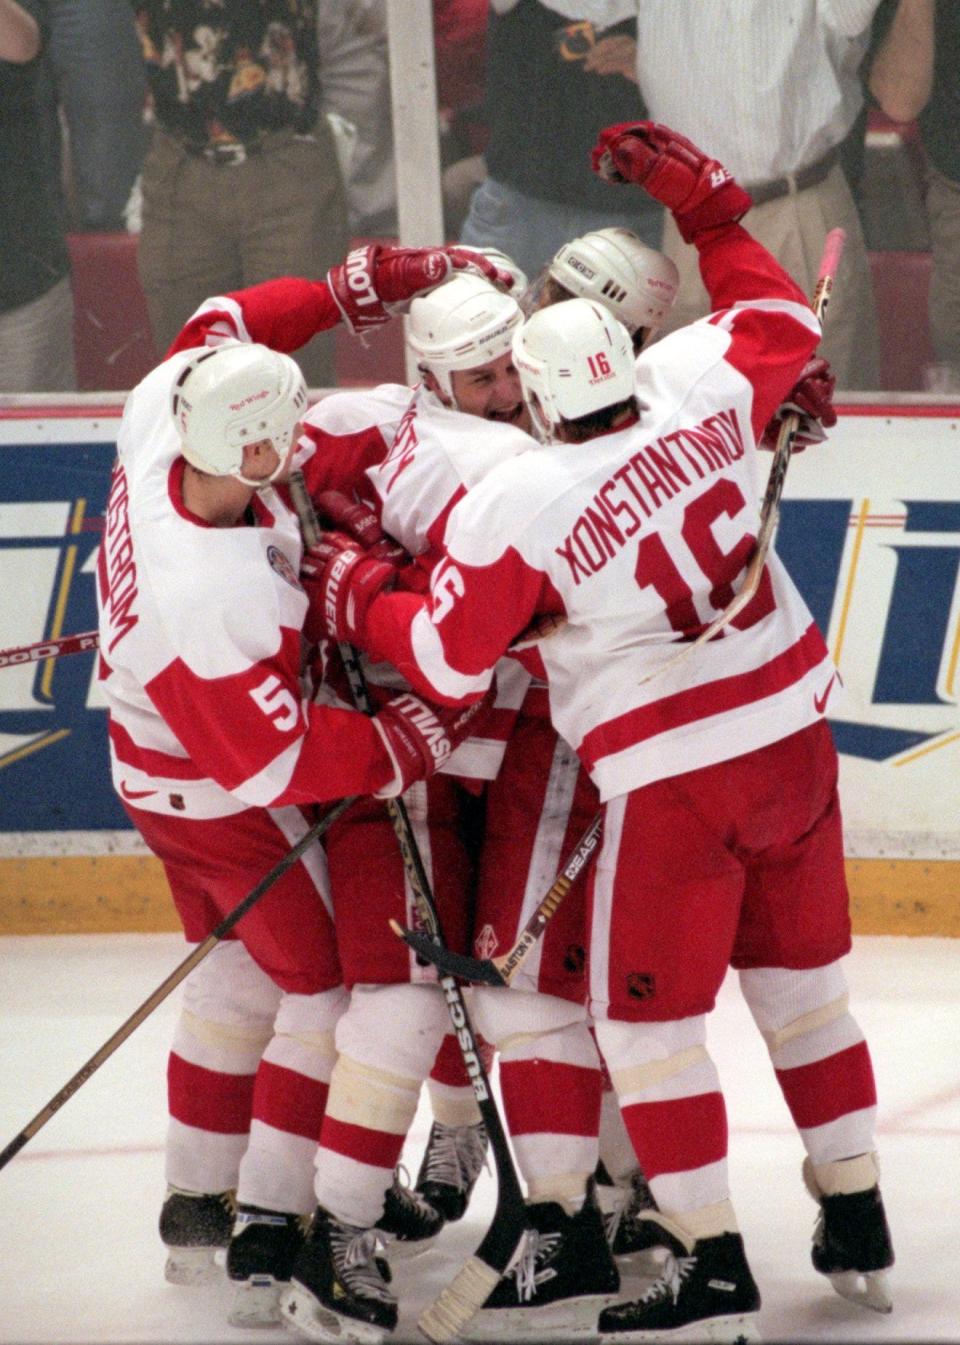 Teammates pile on Darren McCarty after his breakaway goal in the second period of Game 4 of the Stanley Cup Finals at Joe Louis Arena, June 7, 1997. At right is Vladimir Konstantinov and Nicklas Lidstrom on at left.